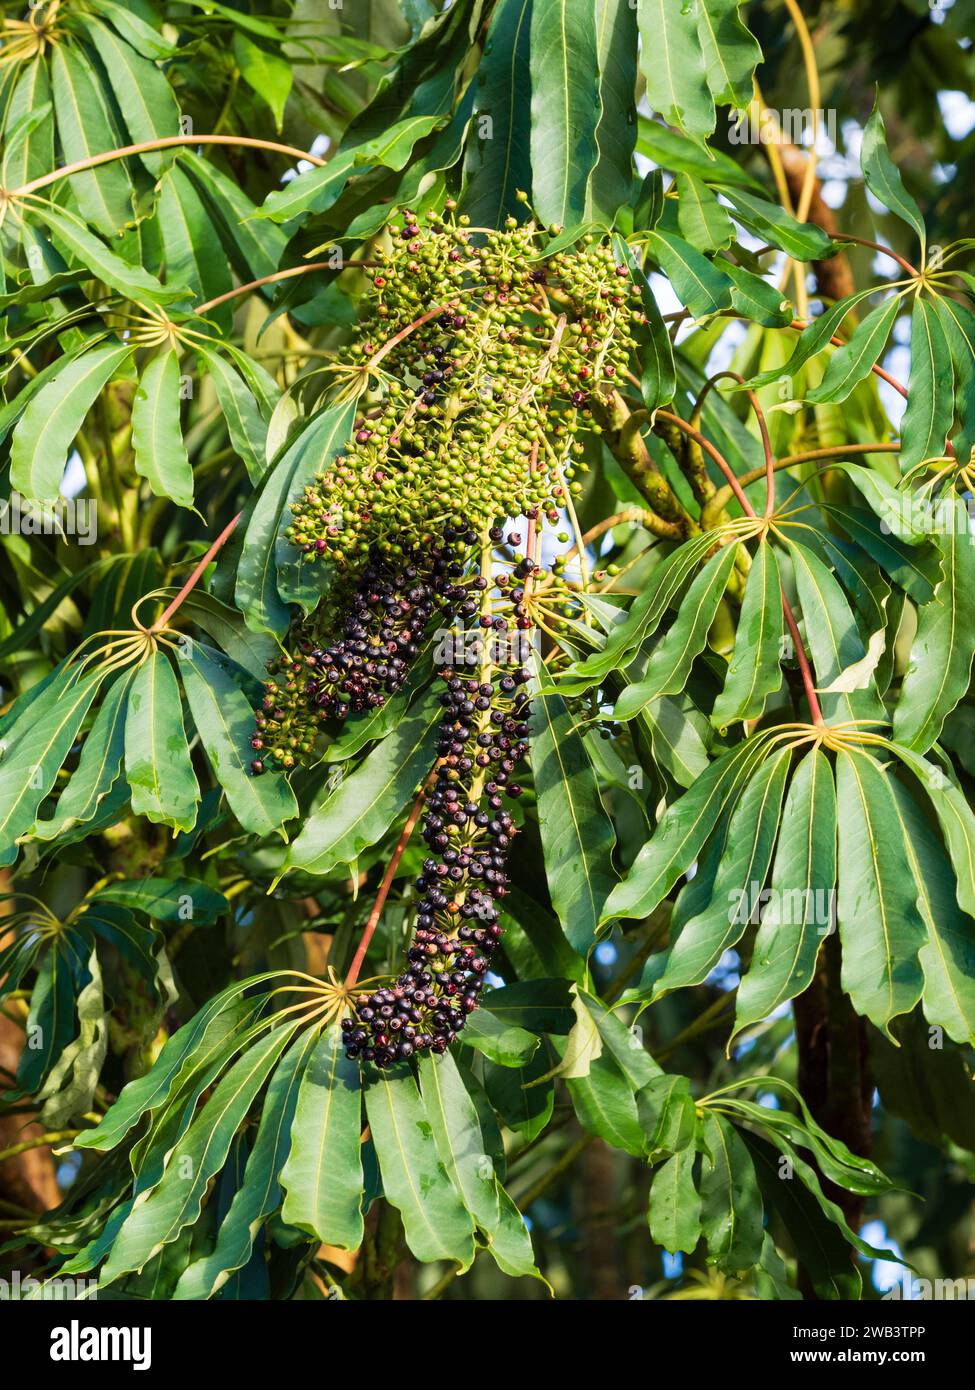 Ripe and unripe berries among the palmate evergreen foliage of the exotic Schefflera taiwaniana 'Garden House form' tree Stock Photo